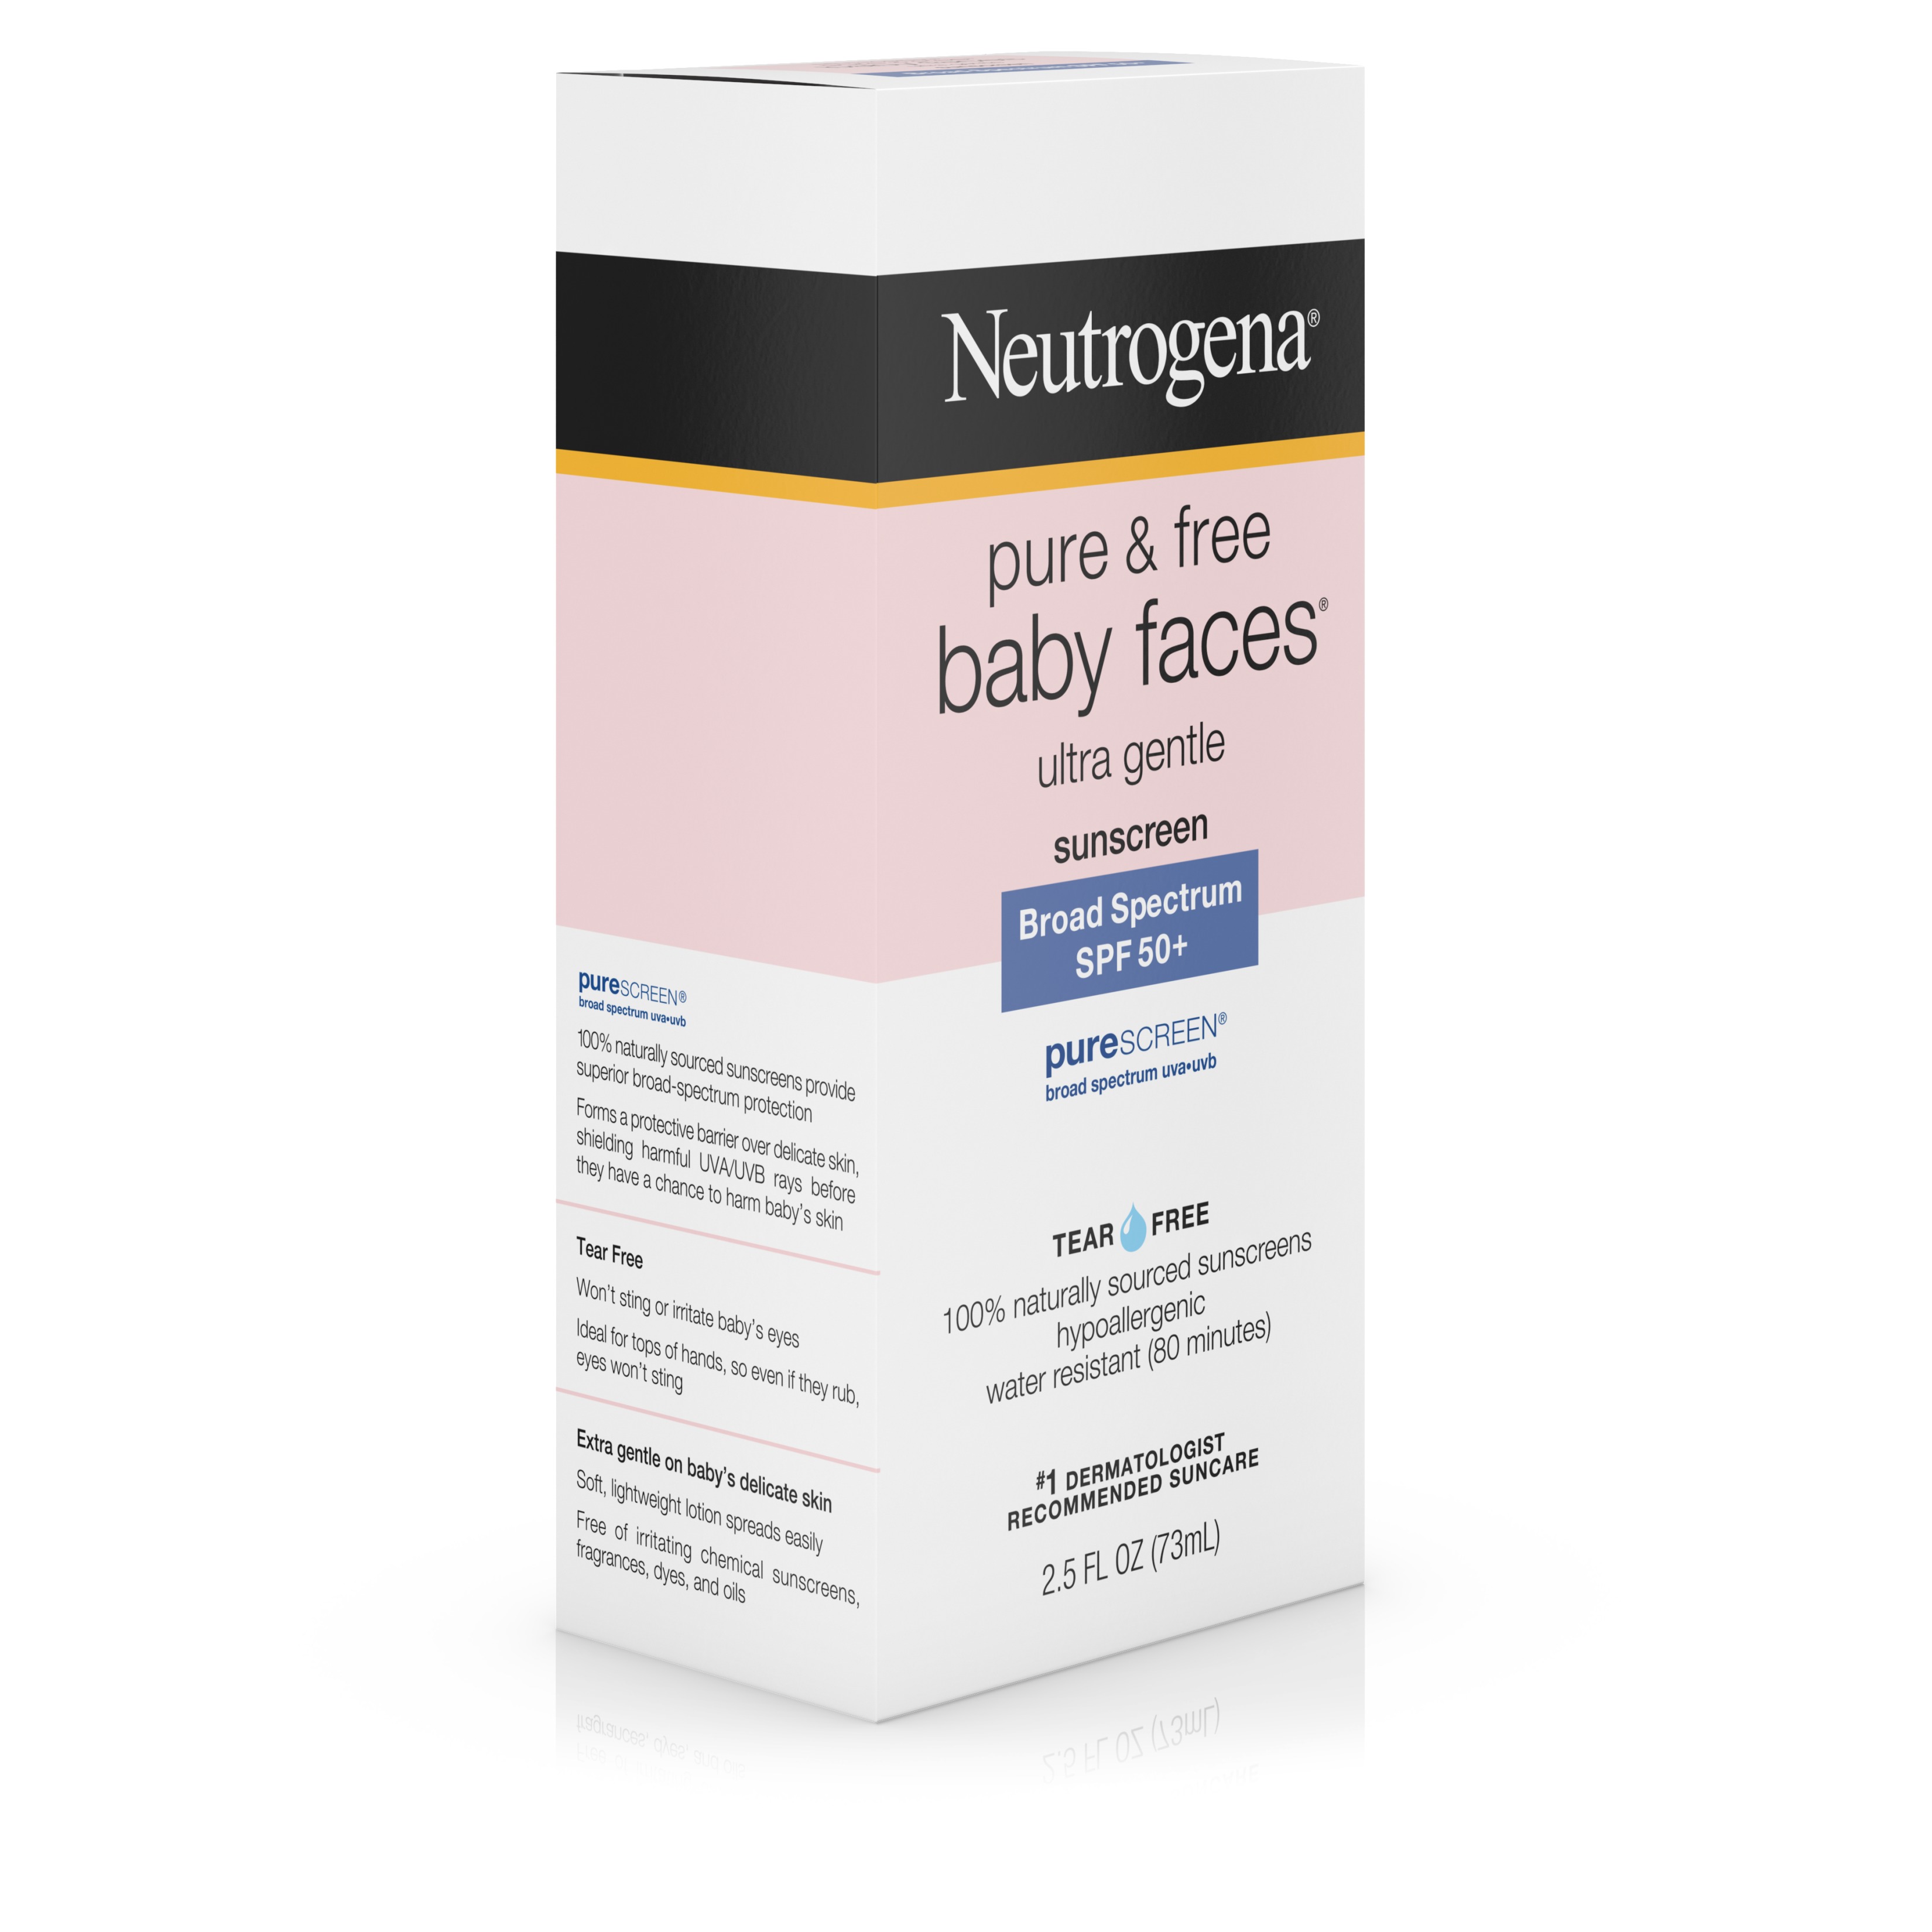 Neutrogena Pure & Free Baby Faces Ultra Gentle Sunscreen Broad Spectrum SPF 45+, 2.5 Oz - image 2 of 6